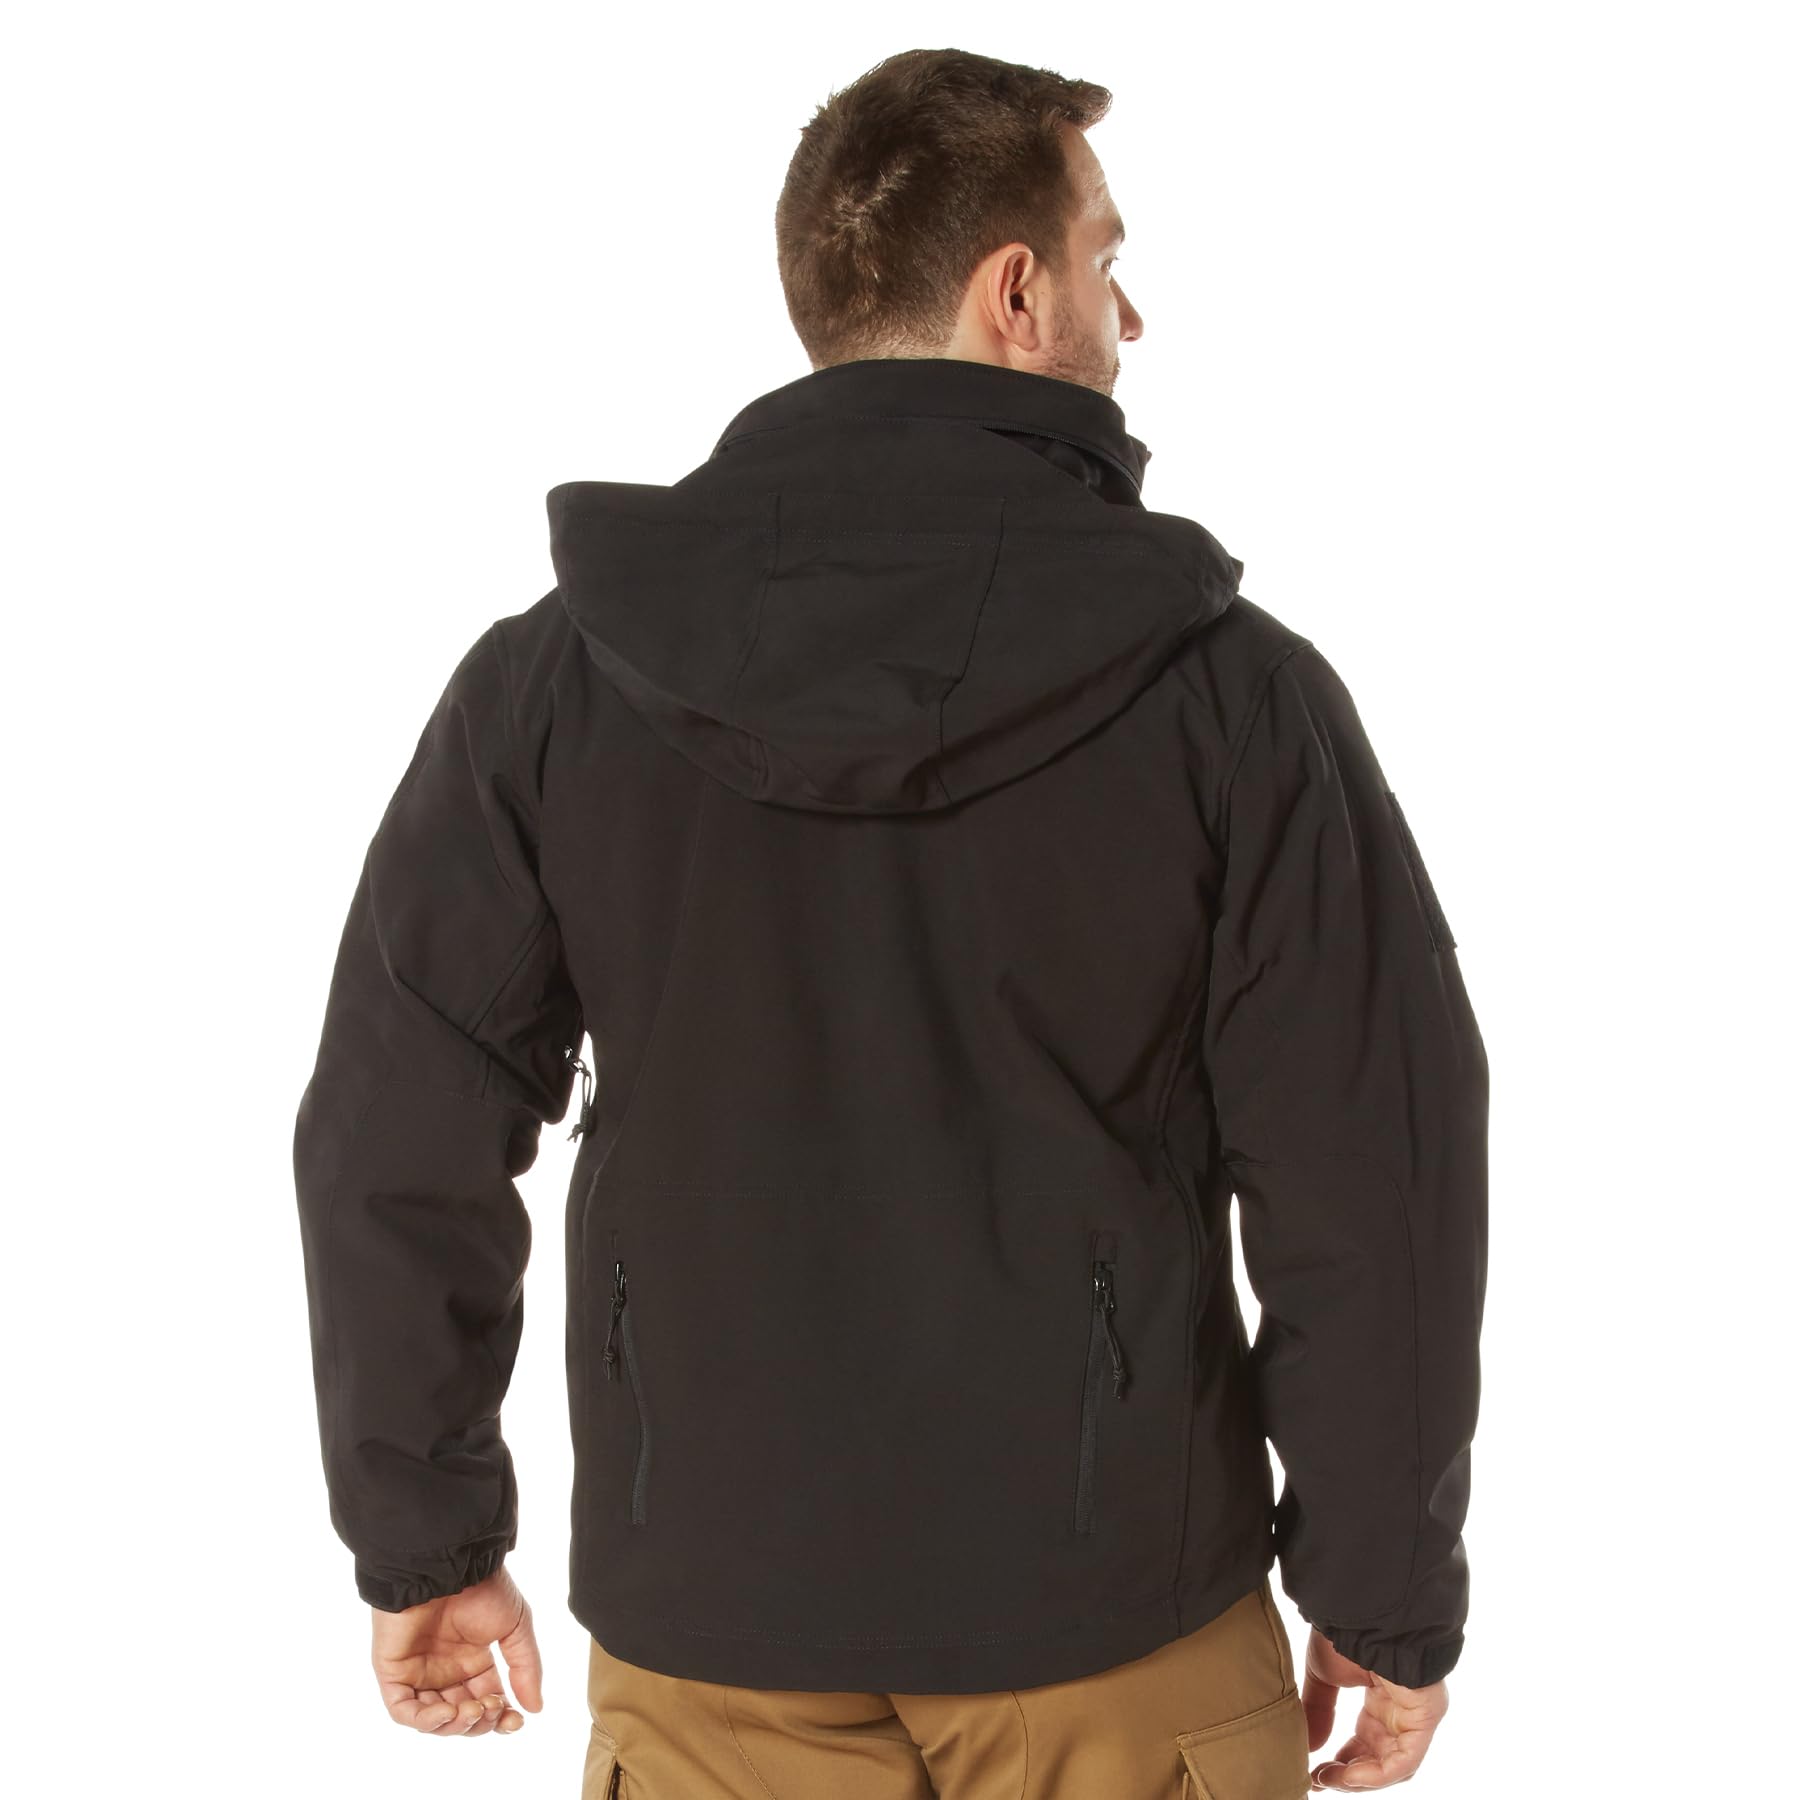 Rothco 3-in-1 Spec Ops Soft Shell Jacket - Ultimate Weather Defense with Removable Fleece Liner - Black - M